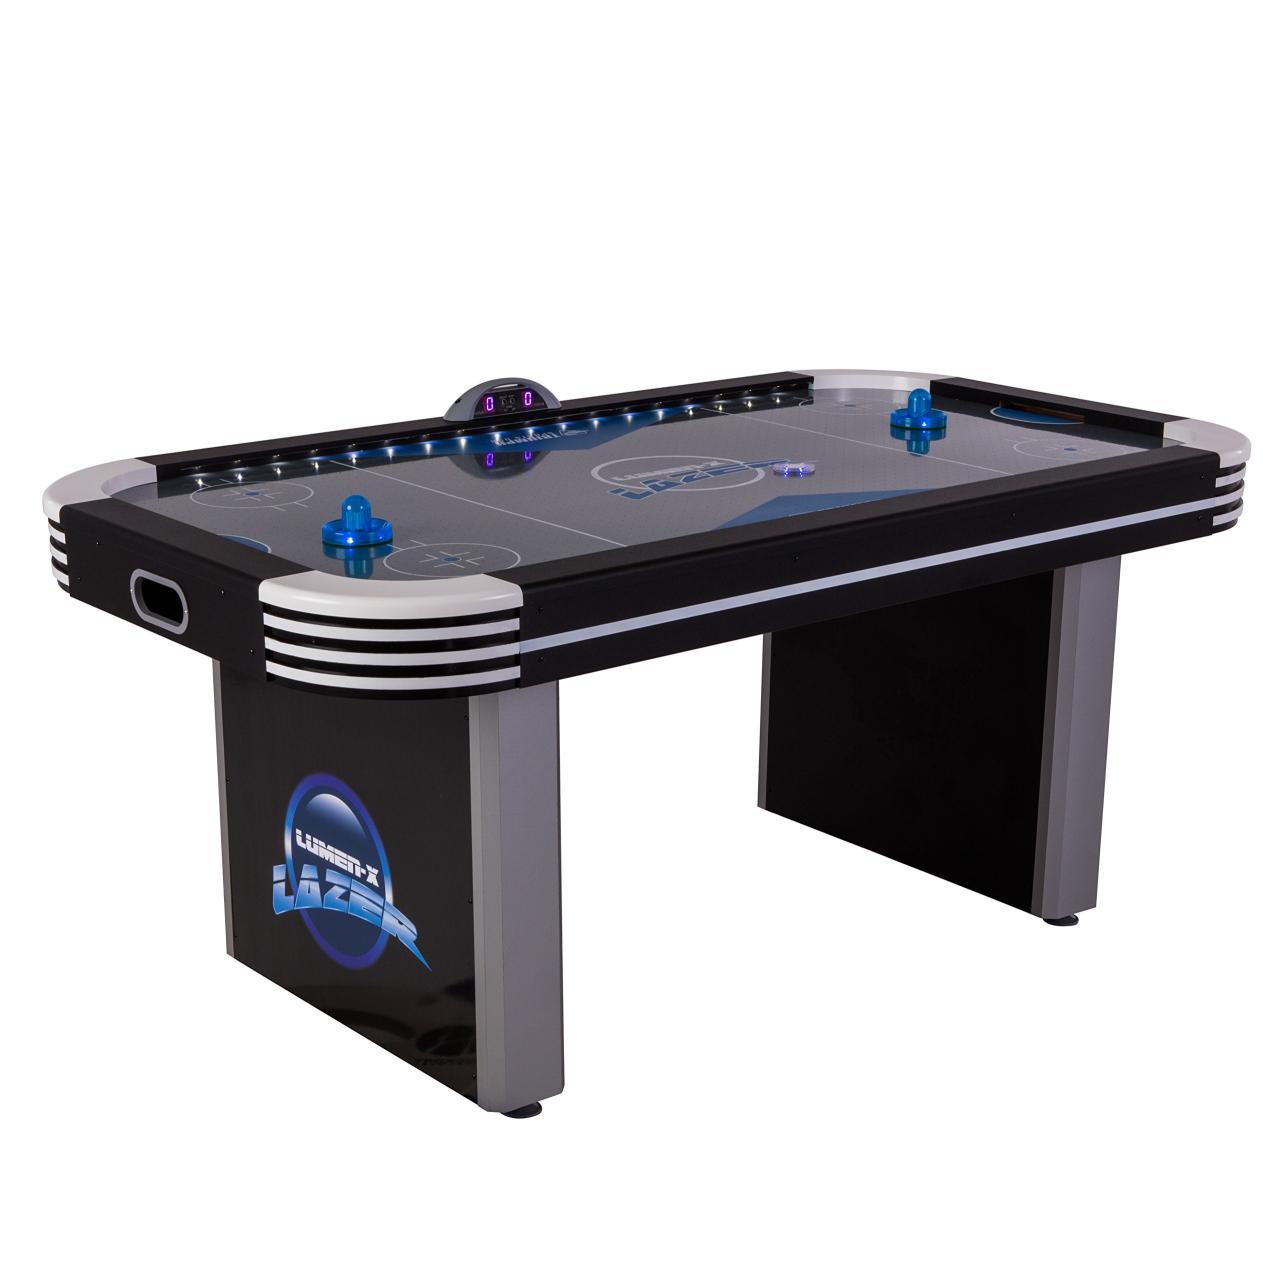 An air hockey table works by pumping